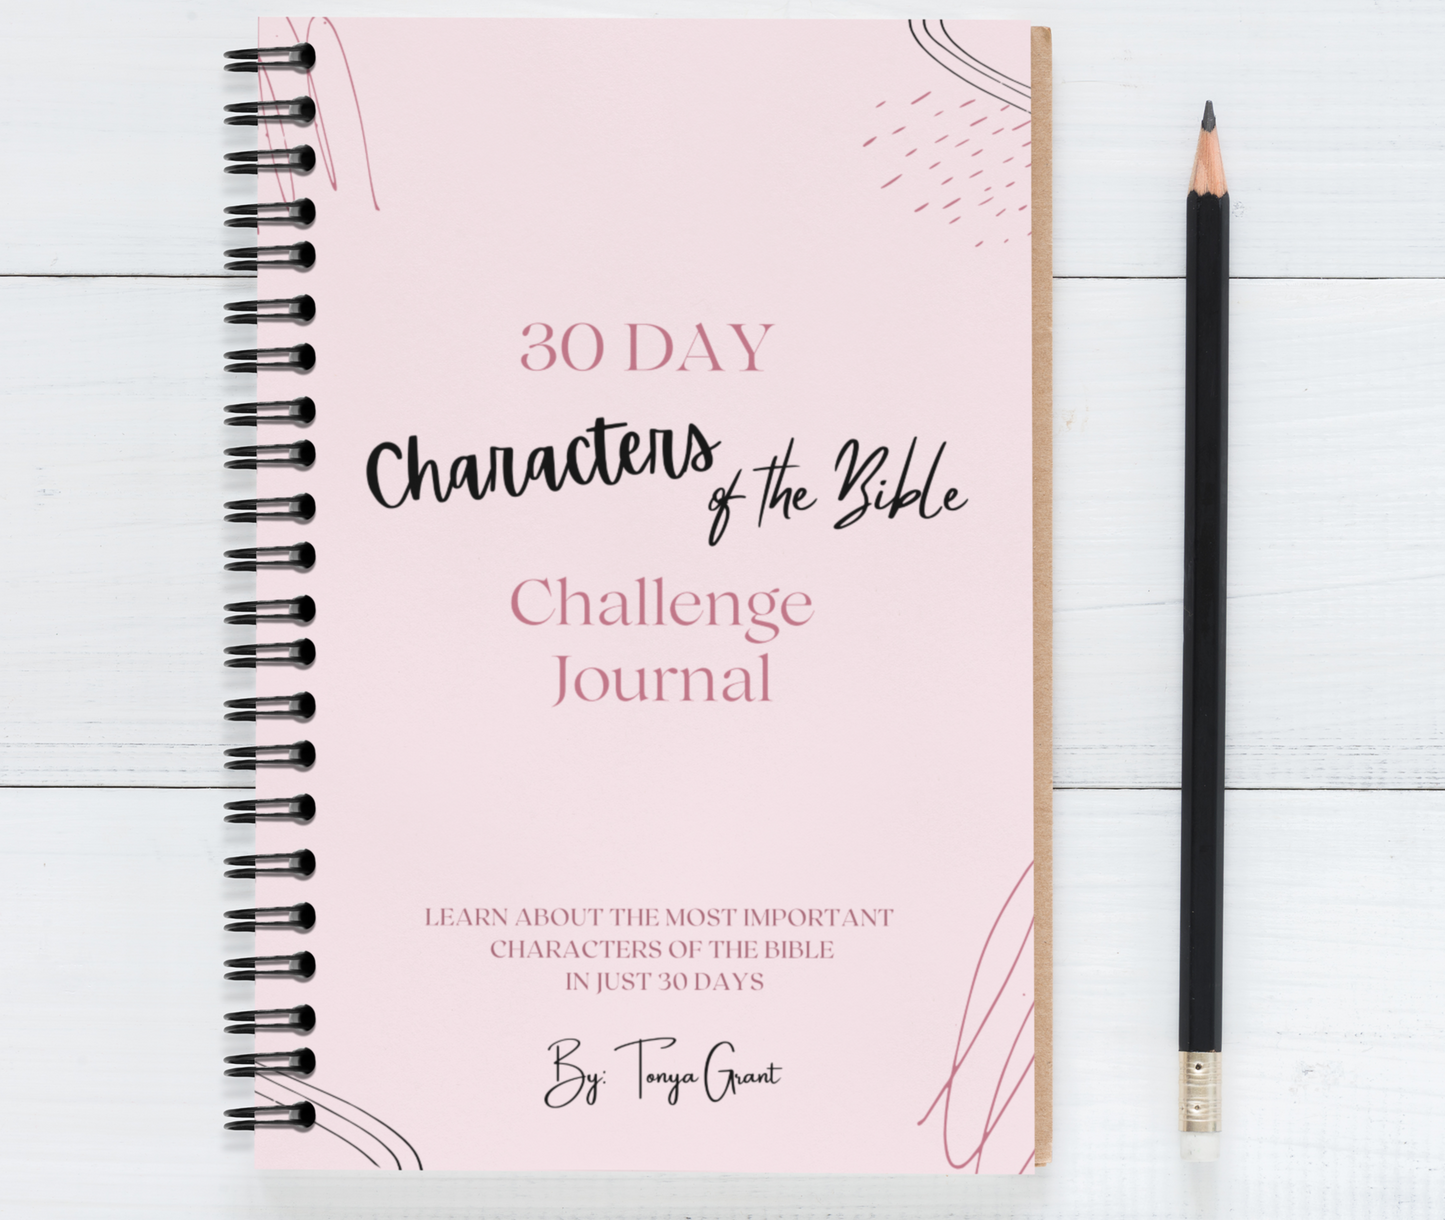 30 Day Characters of the Bible Challenge Journal perfect for New Christians; great for gifts, education, bible study